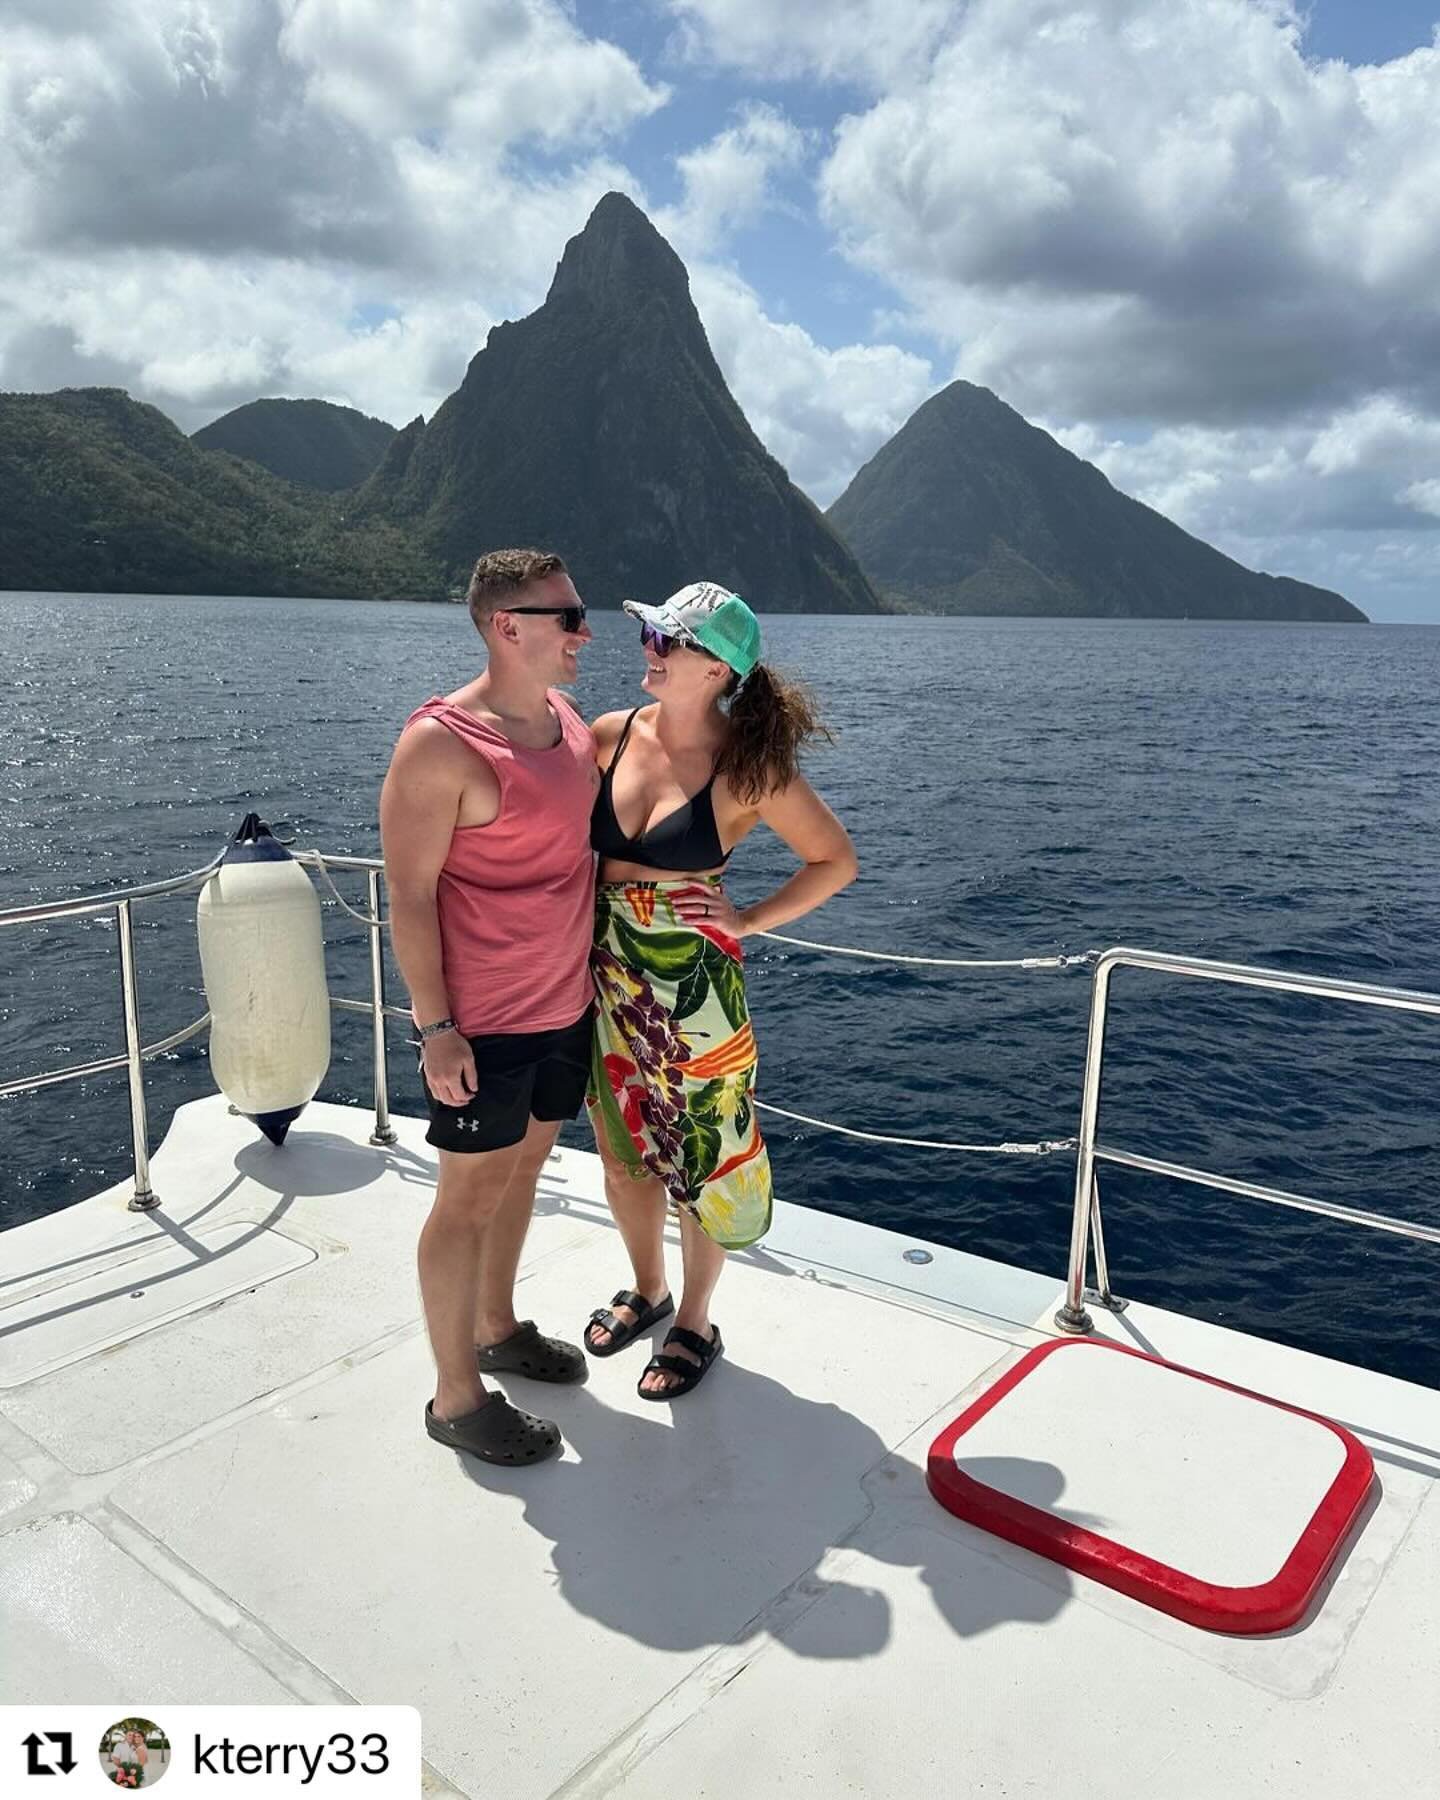 St. Lucia NEVER disappoints! 😍 
#Repost @kterry33

St. Lucia 🇱🇨 exceeded our expectations ✨ helicopter transfer, catamaran tour including waterfalls, sulfur springs, snorkeling, and just some good quality R&amp;R ✨ we couldn&rsquo;t have asked for